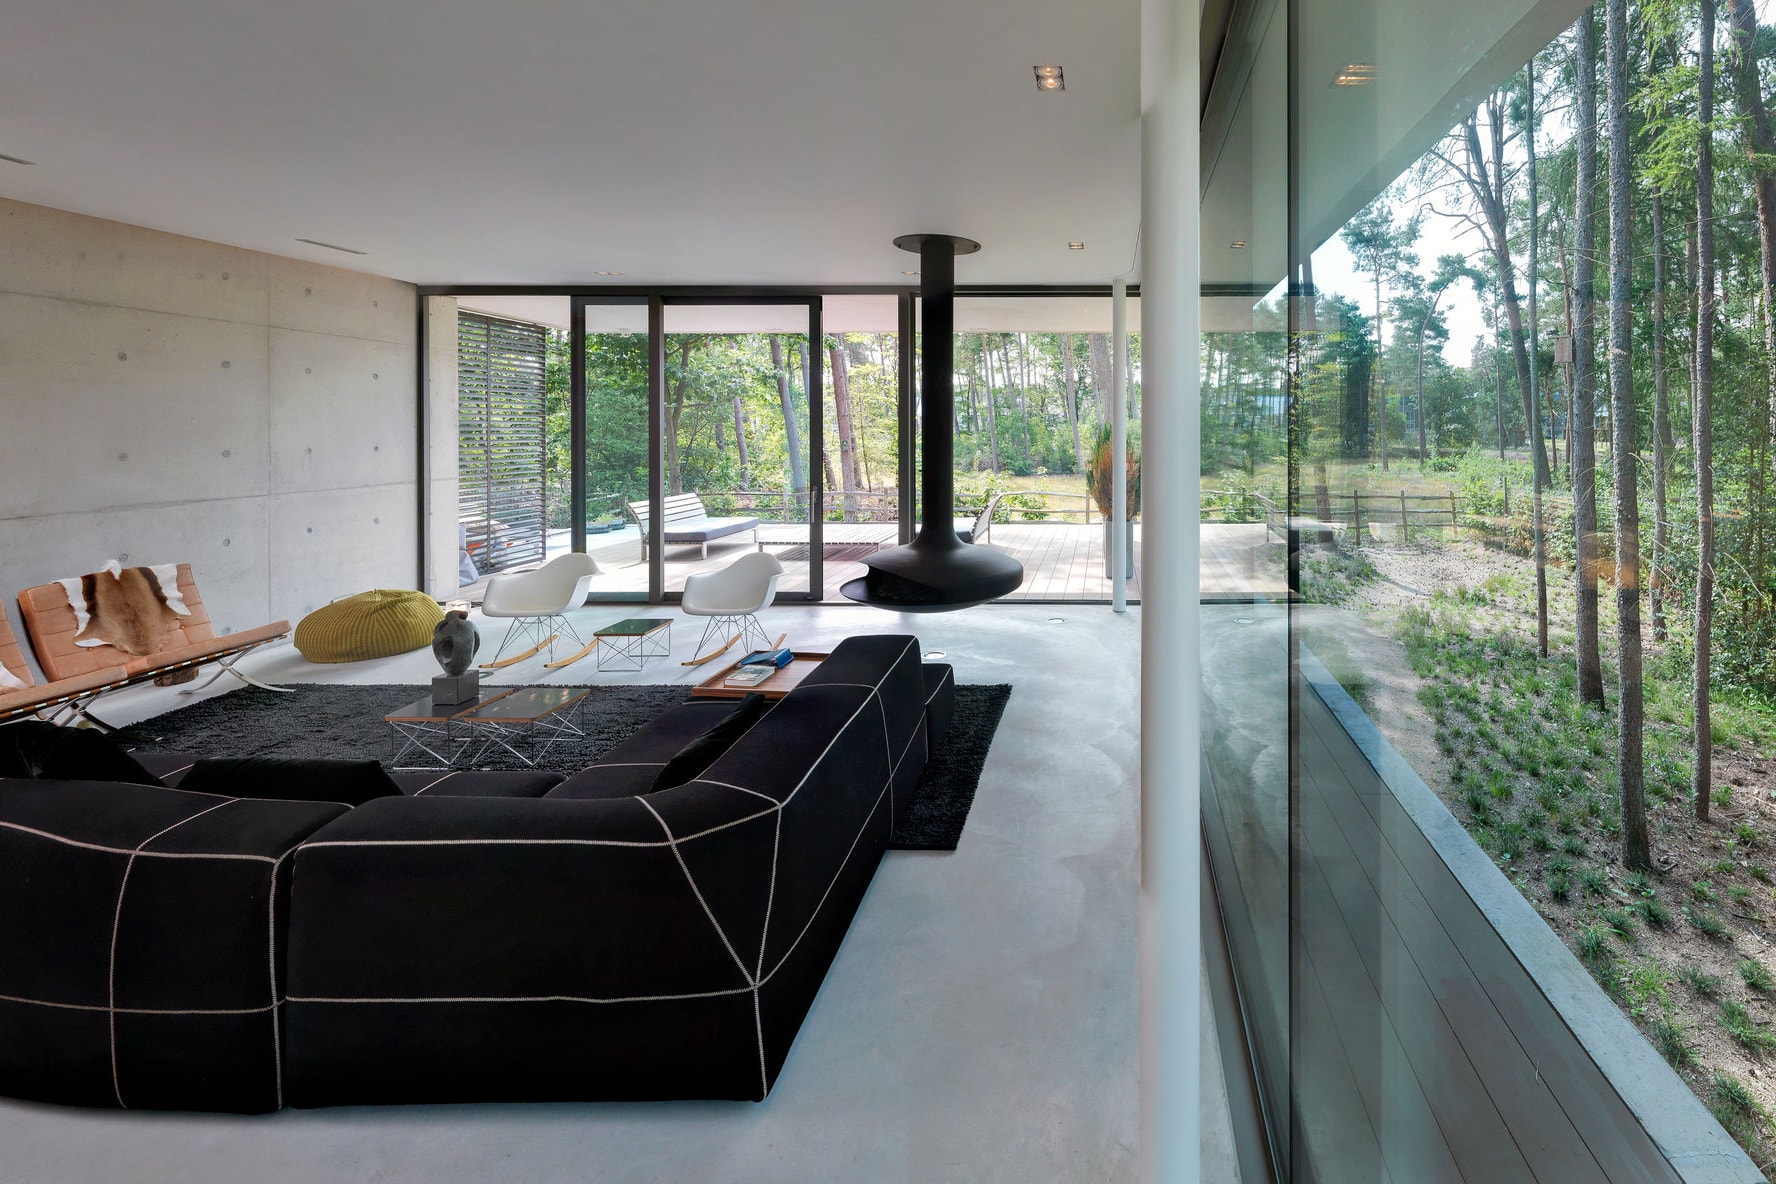 House Zeist Bedaux de Brouwer Architects The Netherlands Home House Houses Modern Interior Exterior Trees Woodland Forest Nature